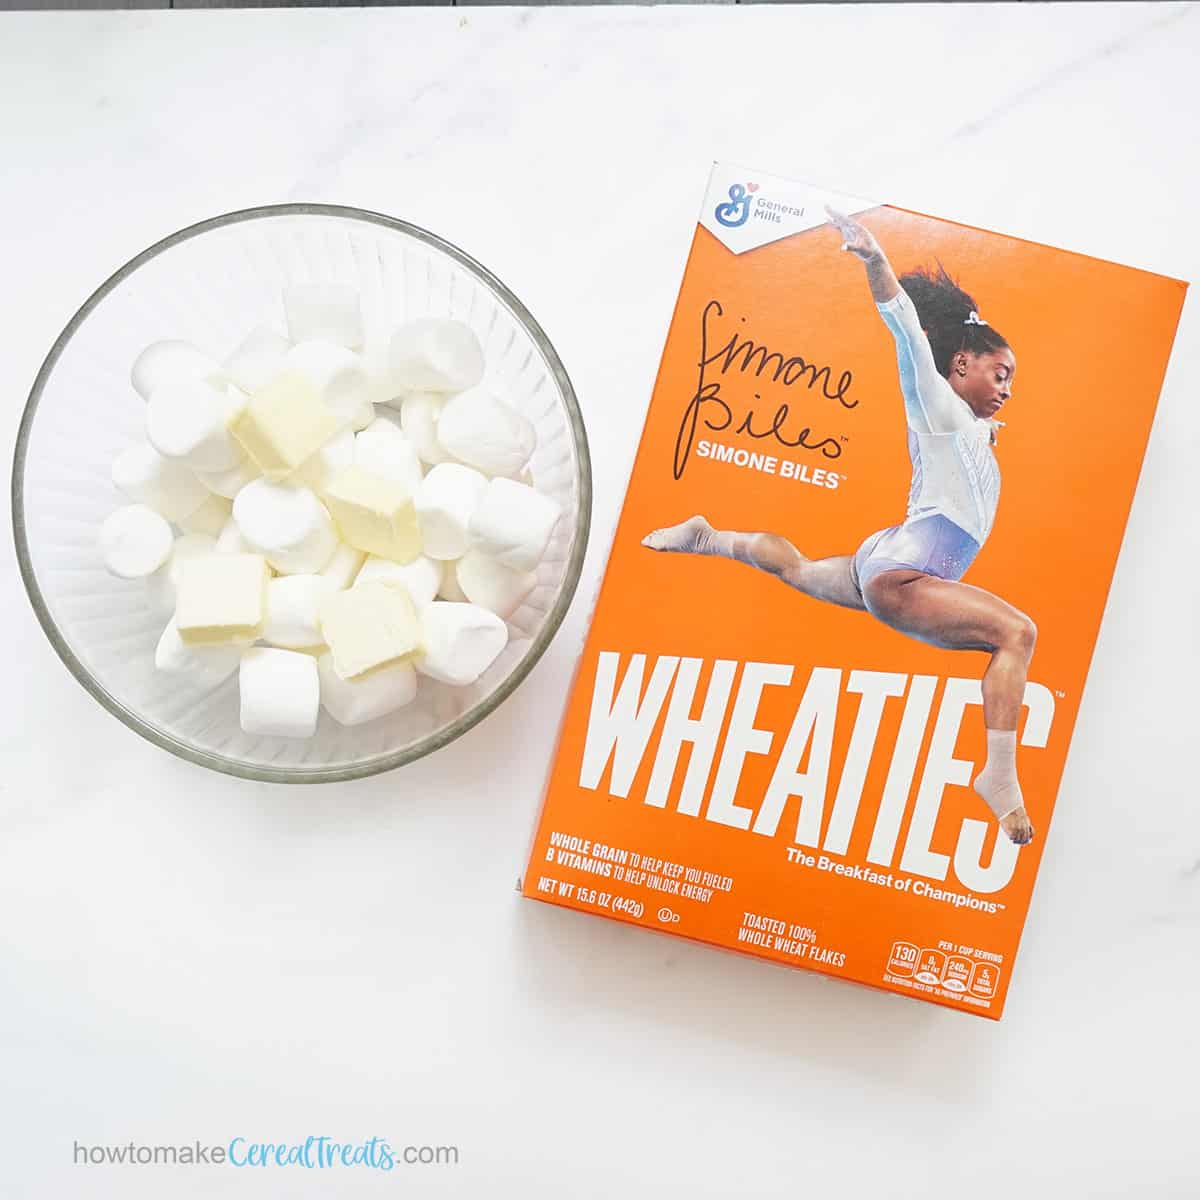 bowl of marshmallows and butter and box of Wheaties cereal